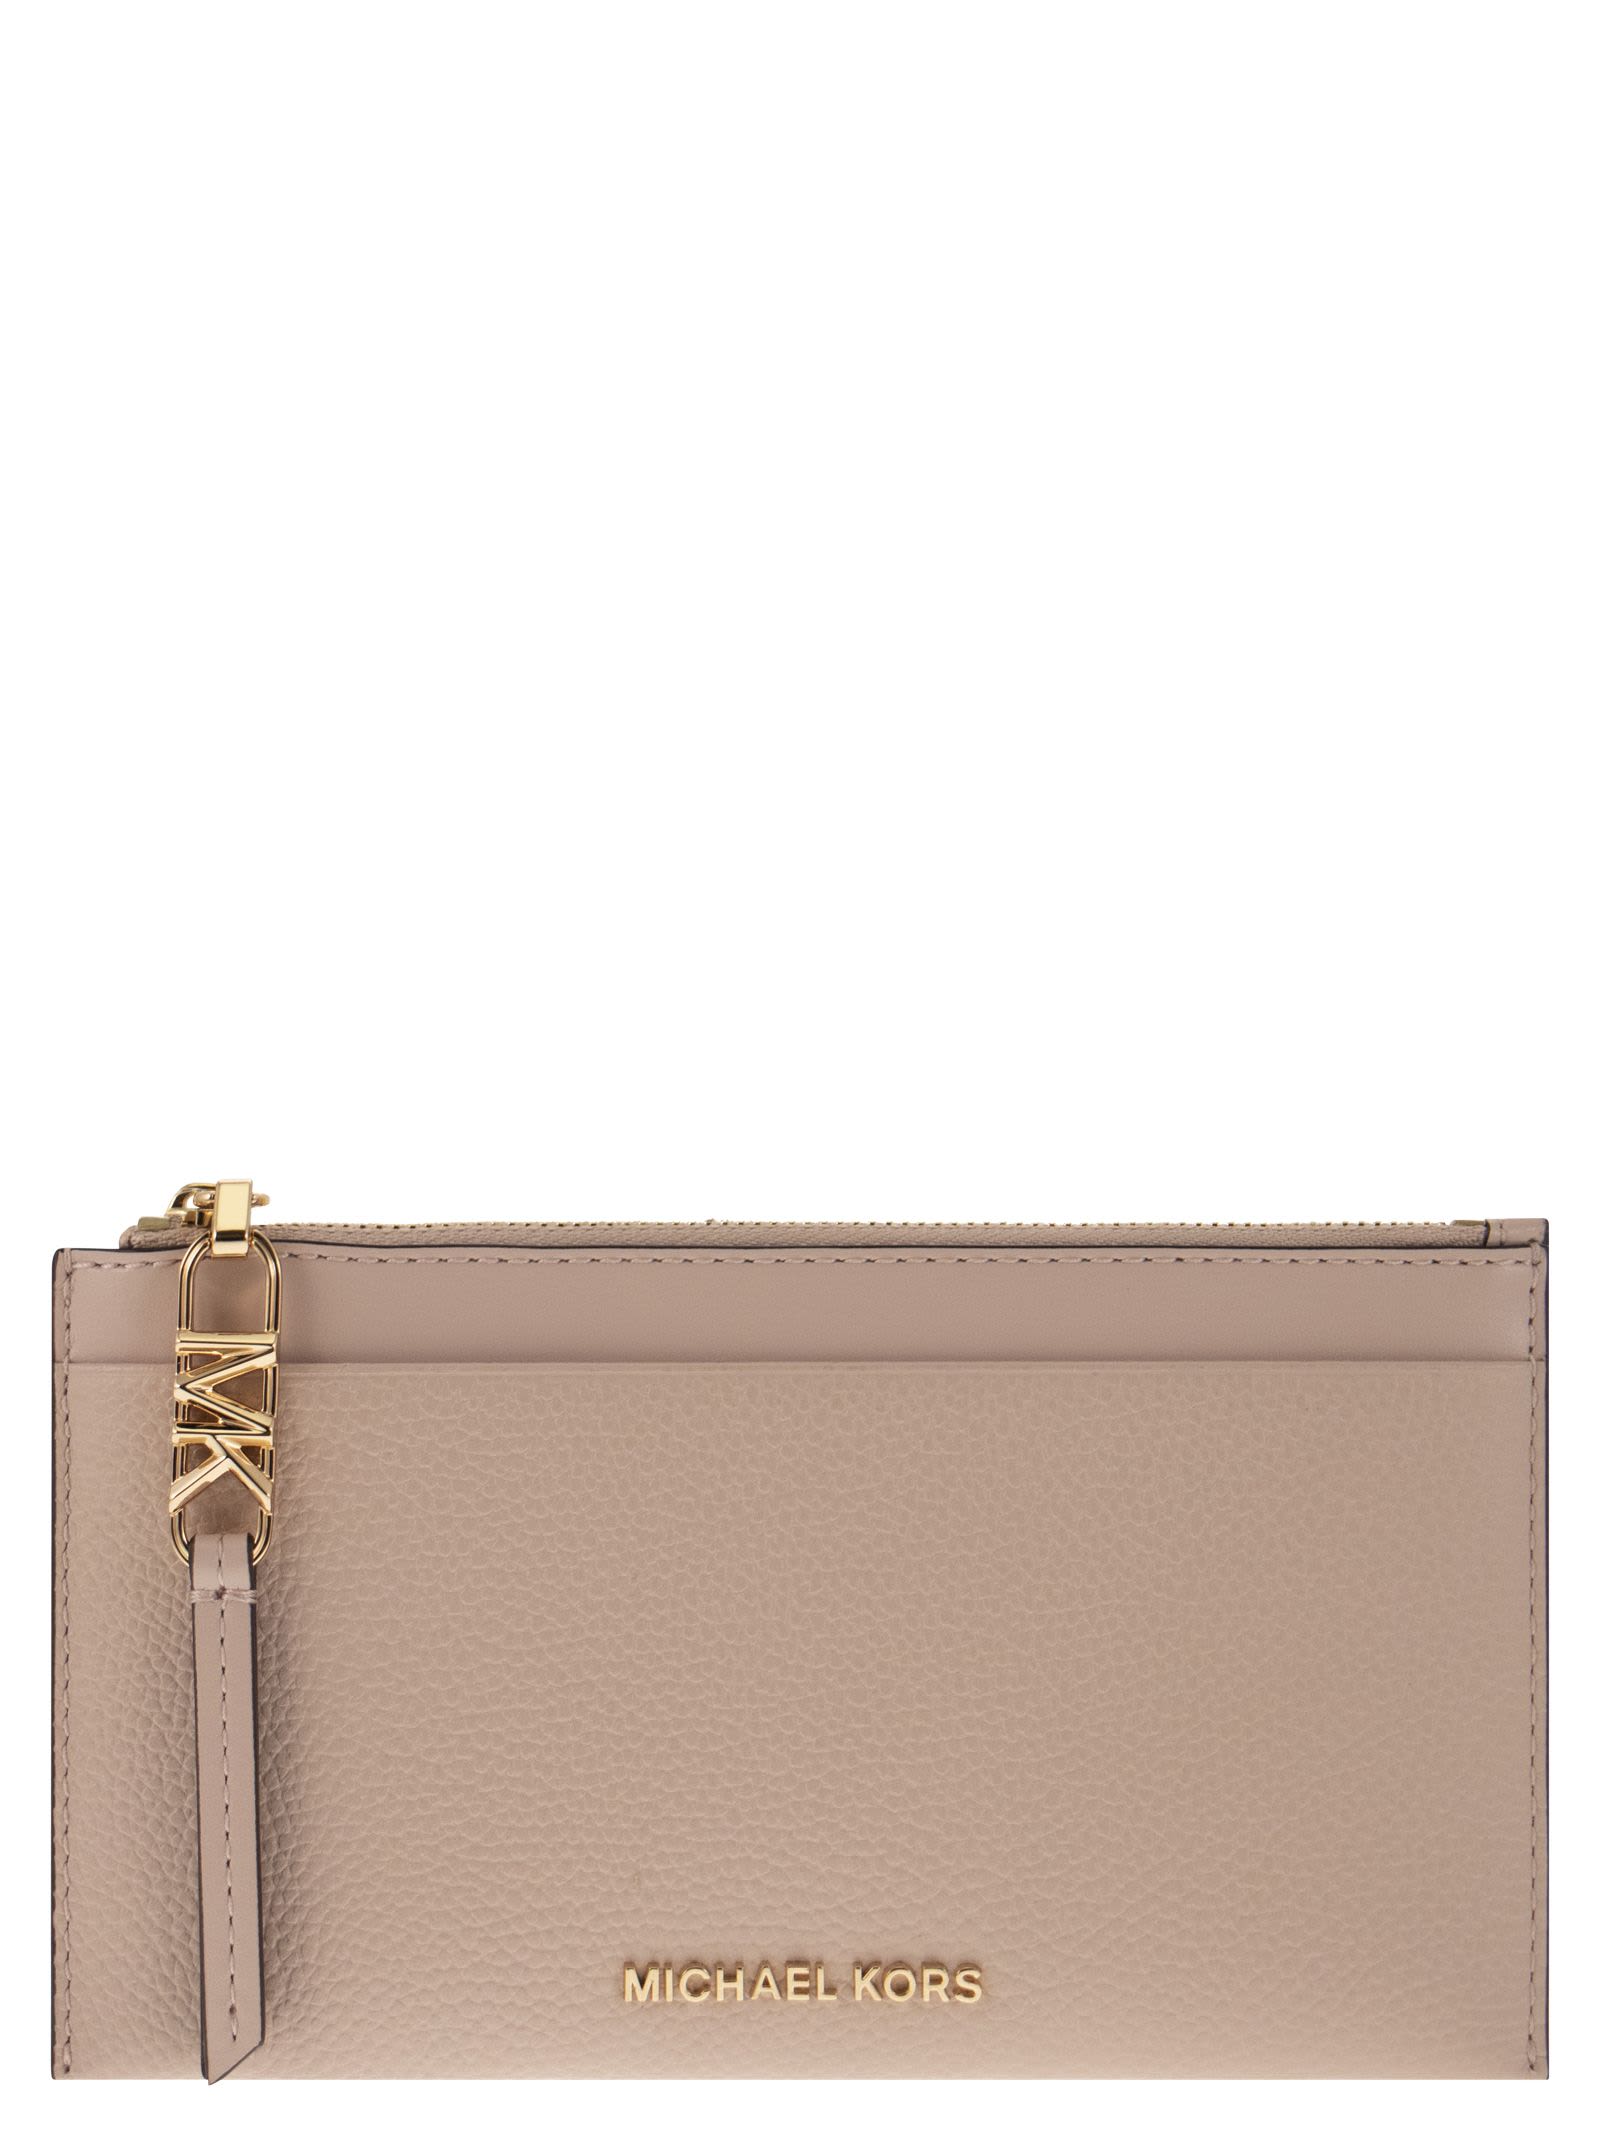 MICHAEL KORS LARGE CREDIT CARD HOLDER IN GRAINED LEATHER